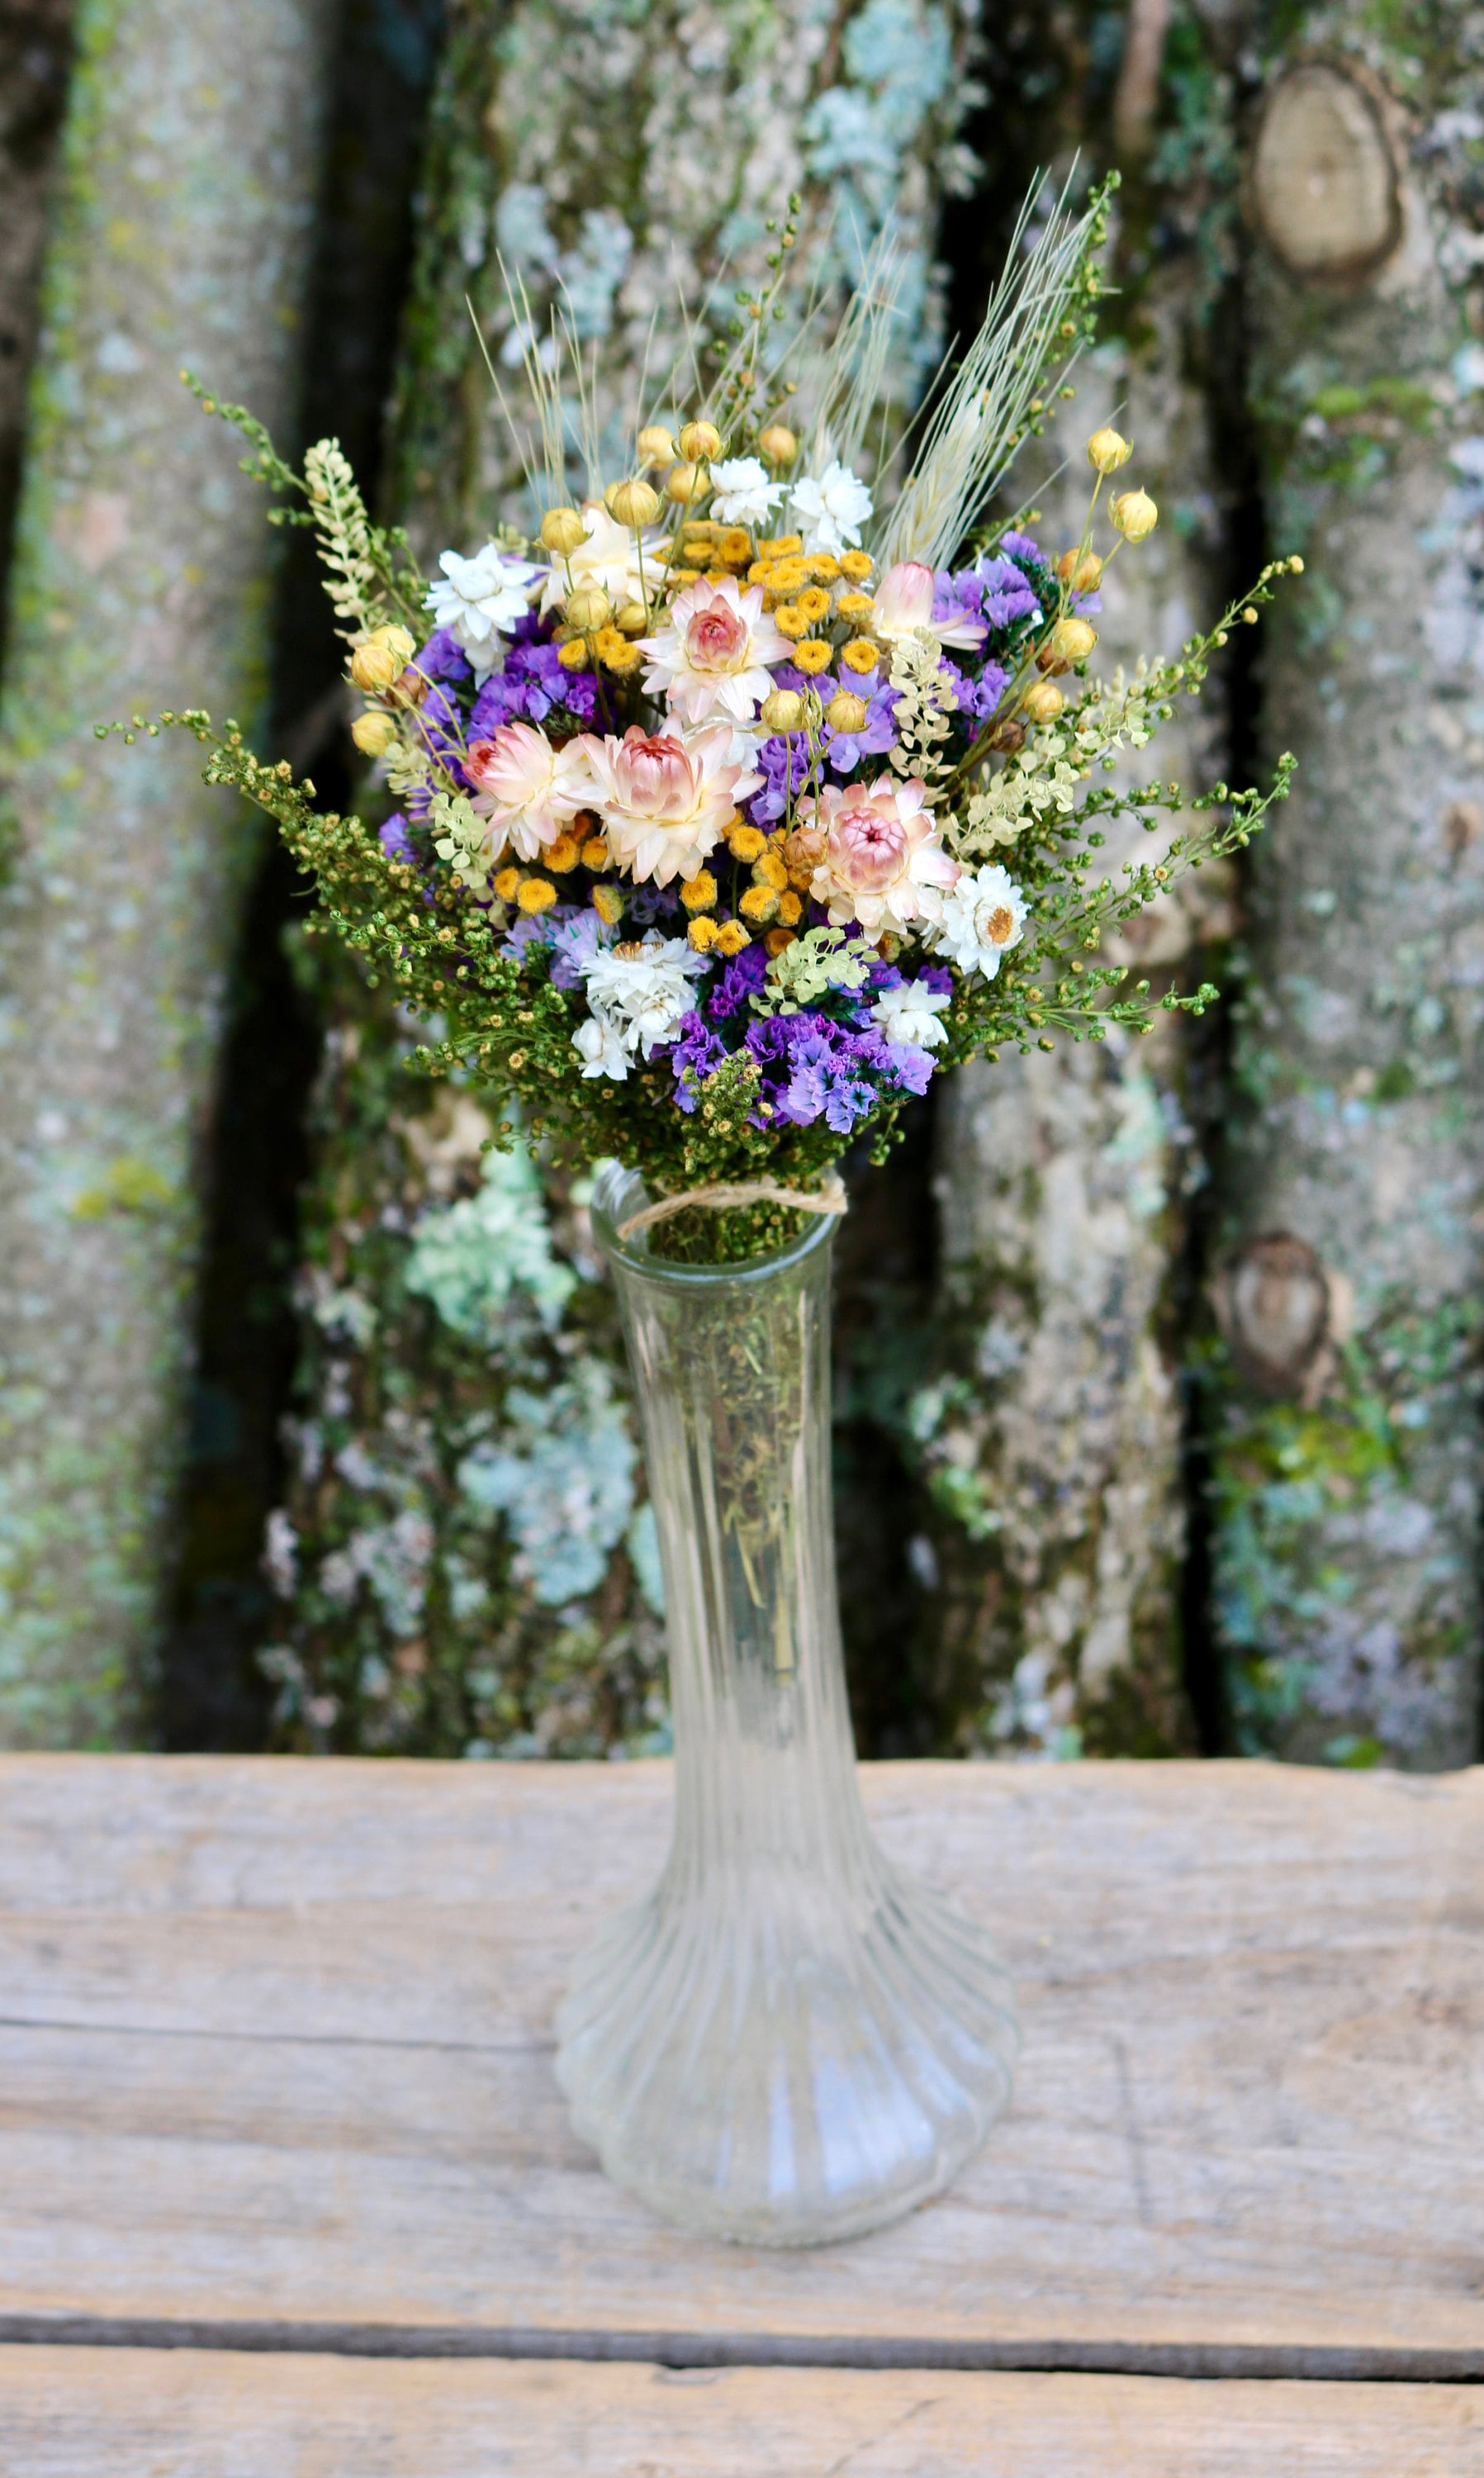 How To Make Mini Dried Flower Bouquets – Adored Vintage